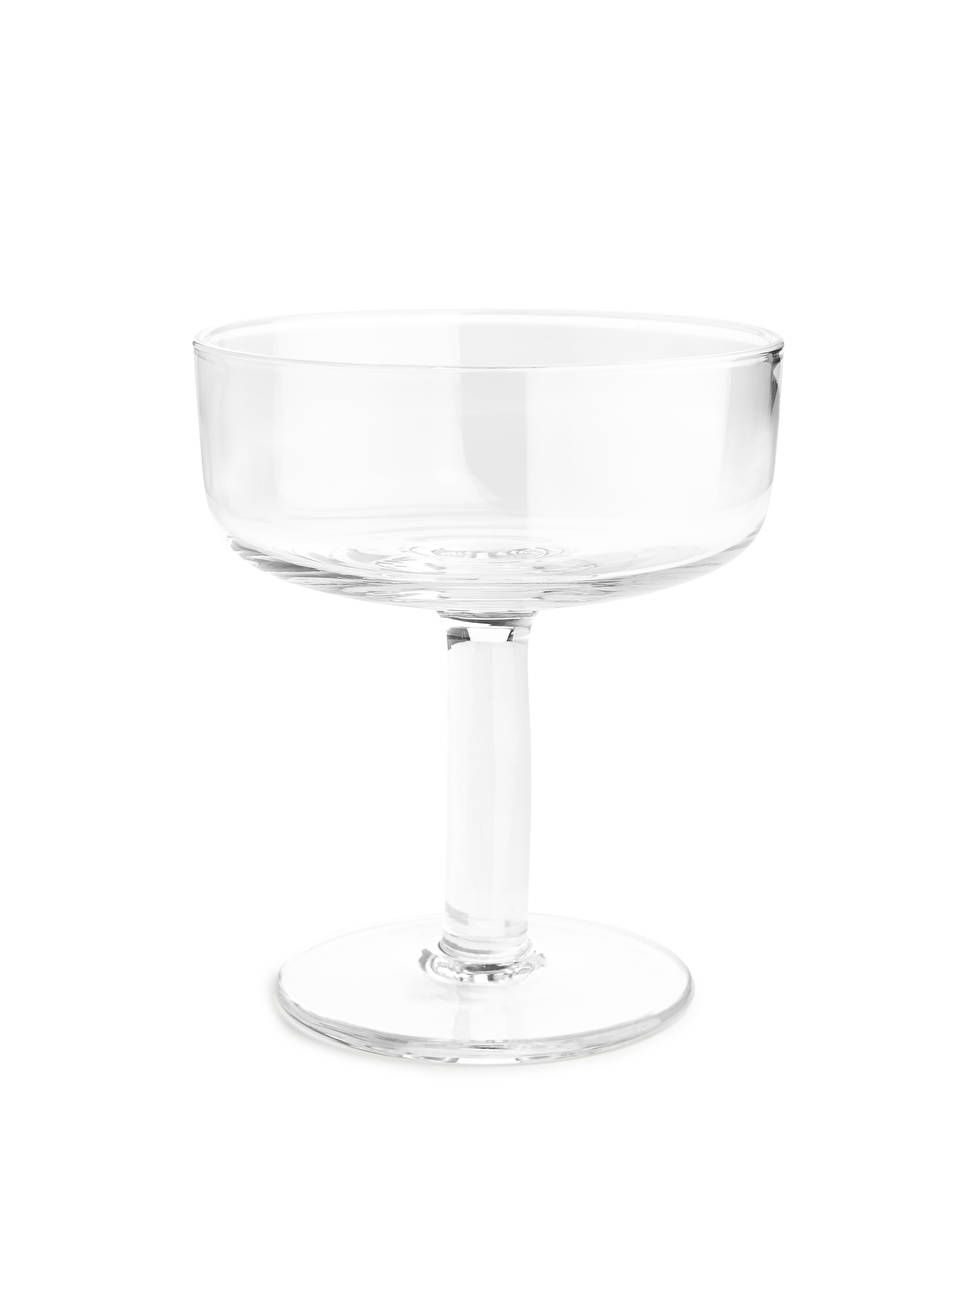 Coupe Glasses, Set of 2 - Clear Glass - ARKET GB | ARKET